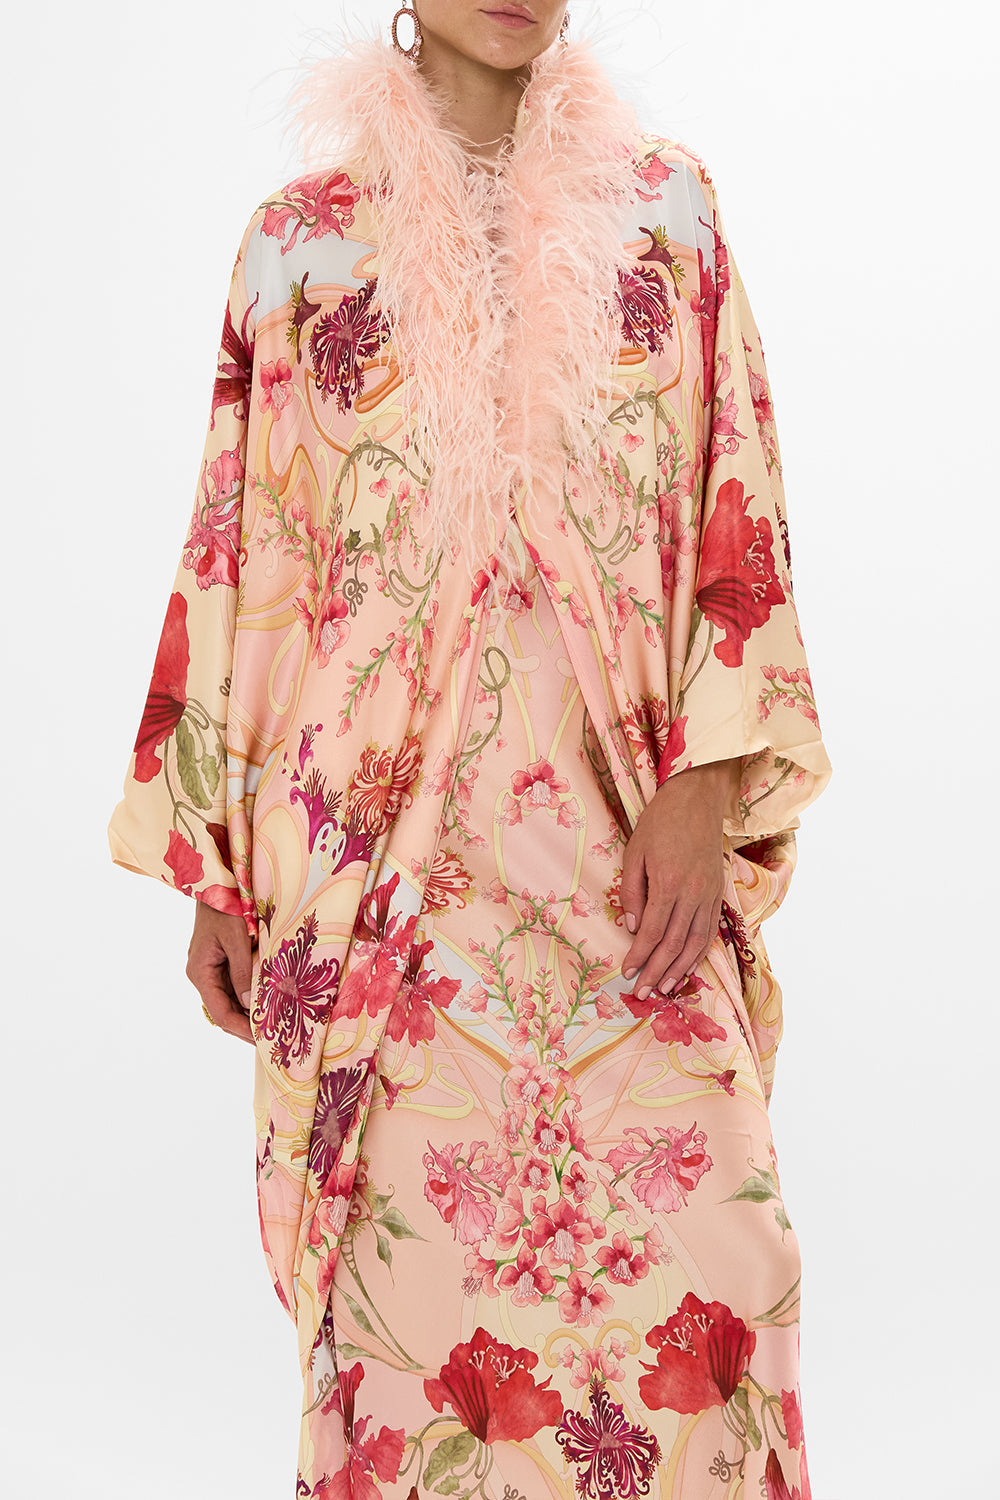 CAMILLA Floral Draped Back Layer with Feather Collar in Blossoms and Brushstrokes